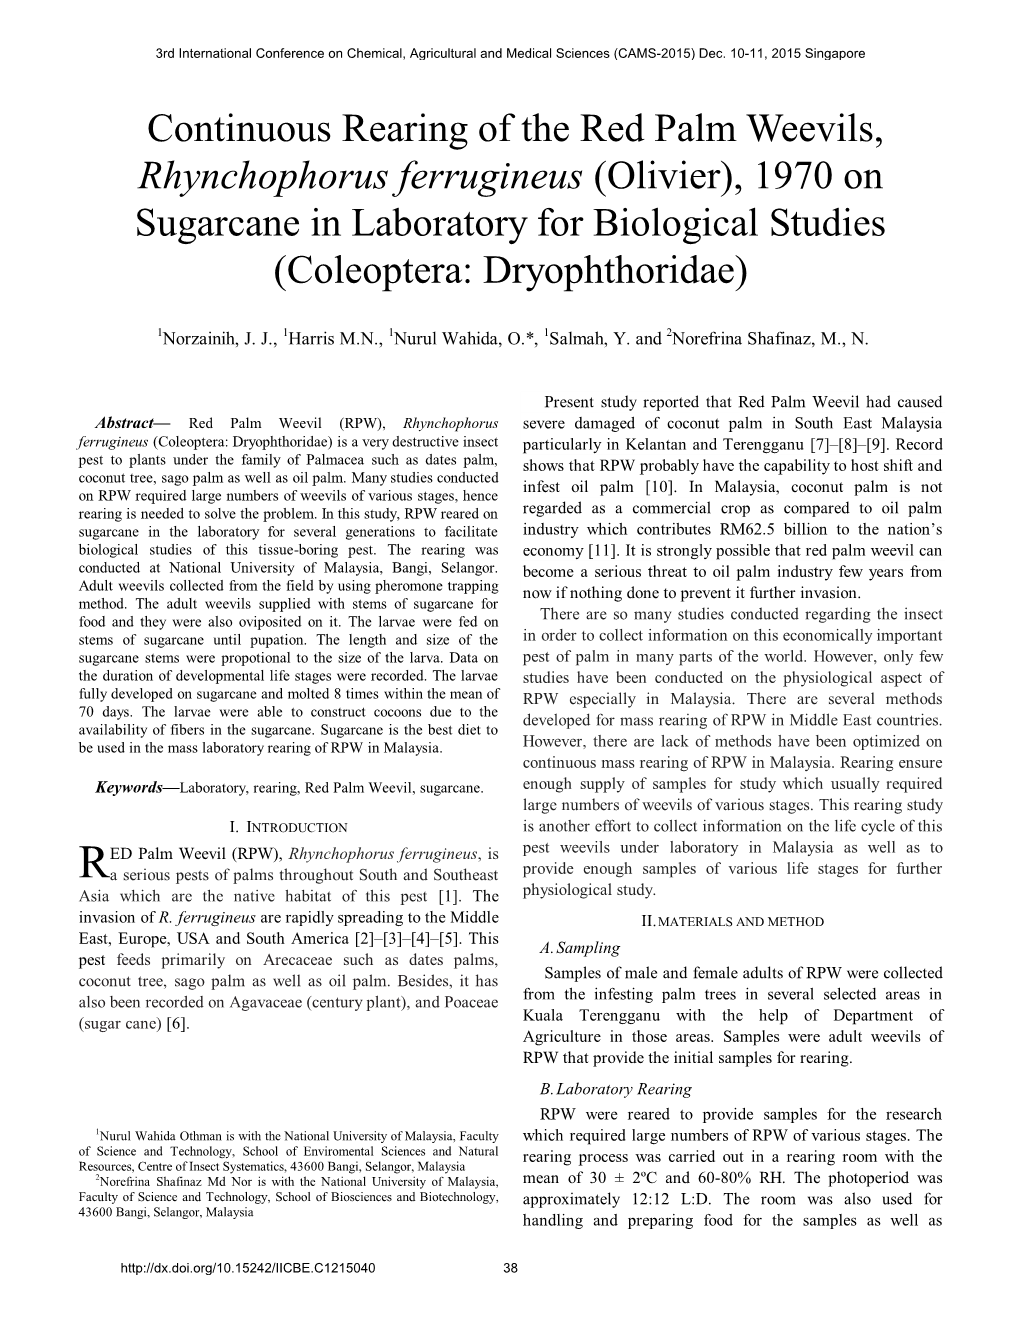 Continuous Rearing of the Red Palm Weevils, Rhynchophorus Ferrugineus (Olivier), 1970 on Sugarcane in Laboratory for Biological Studies (Coleoptera: Dryophthoridae)